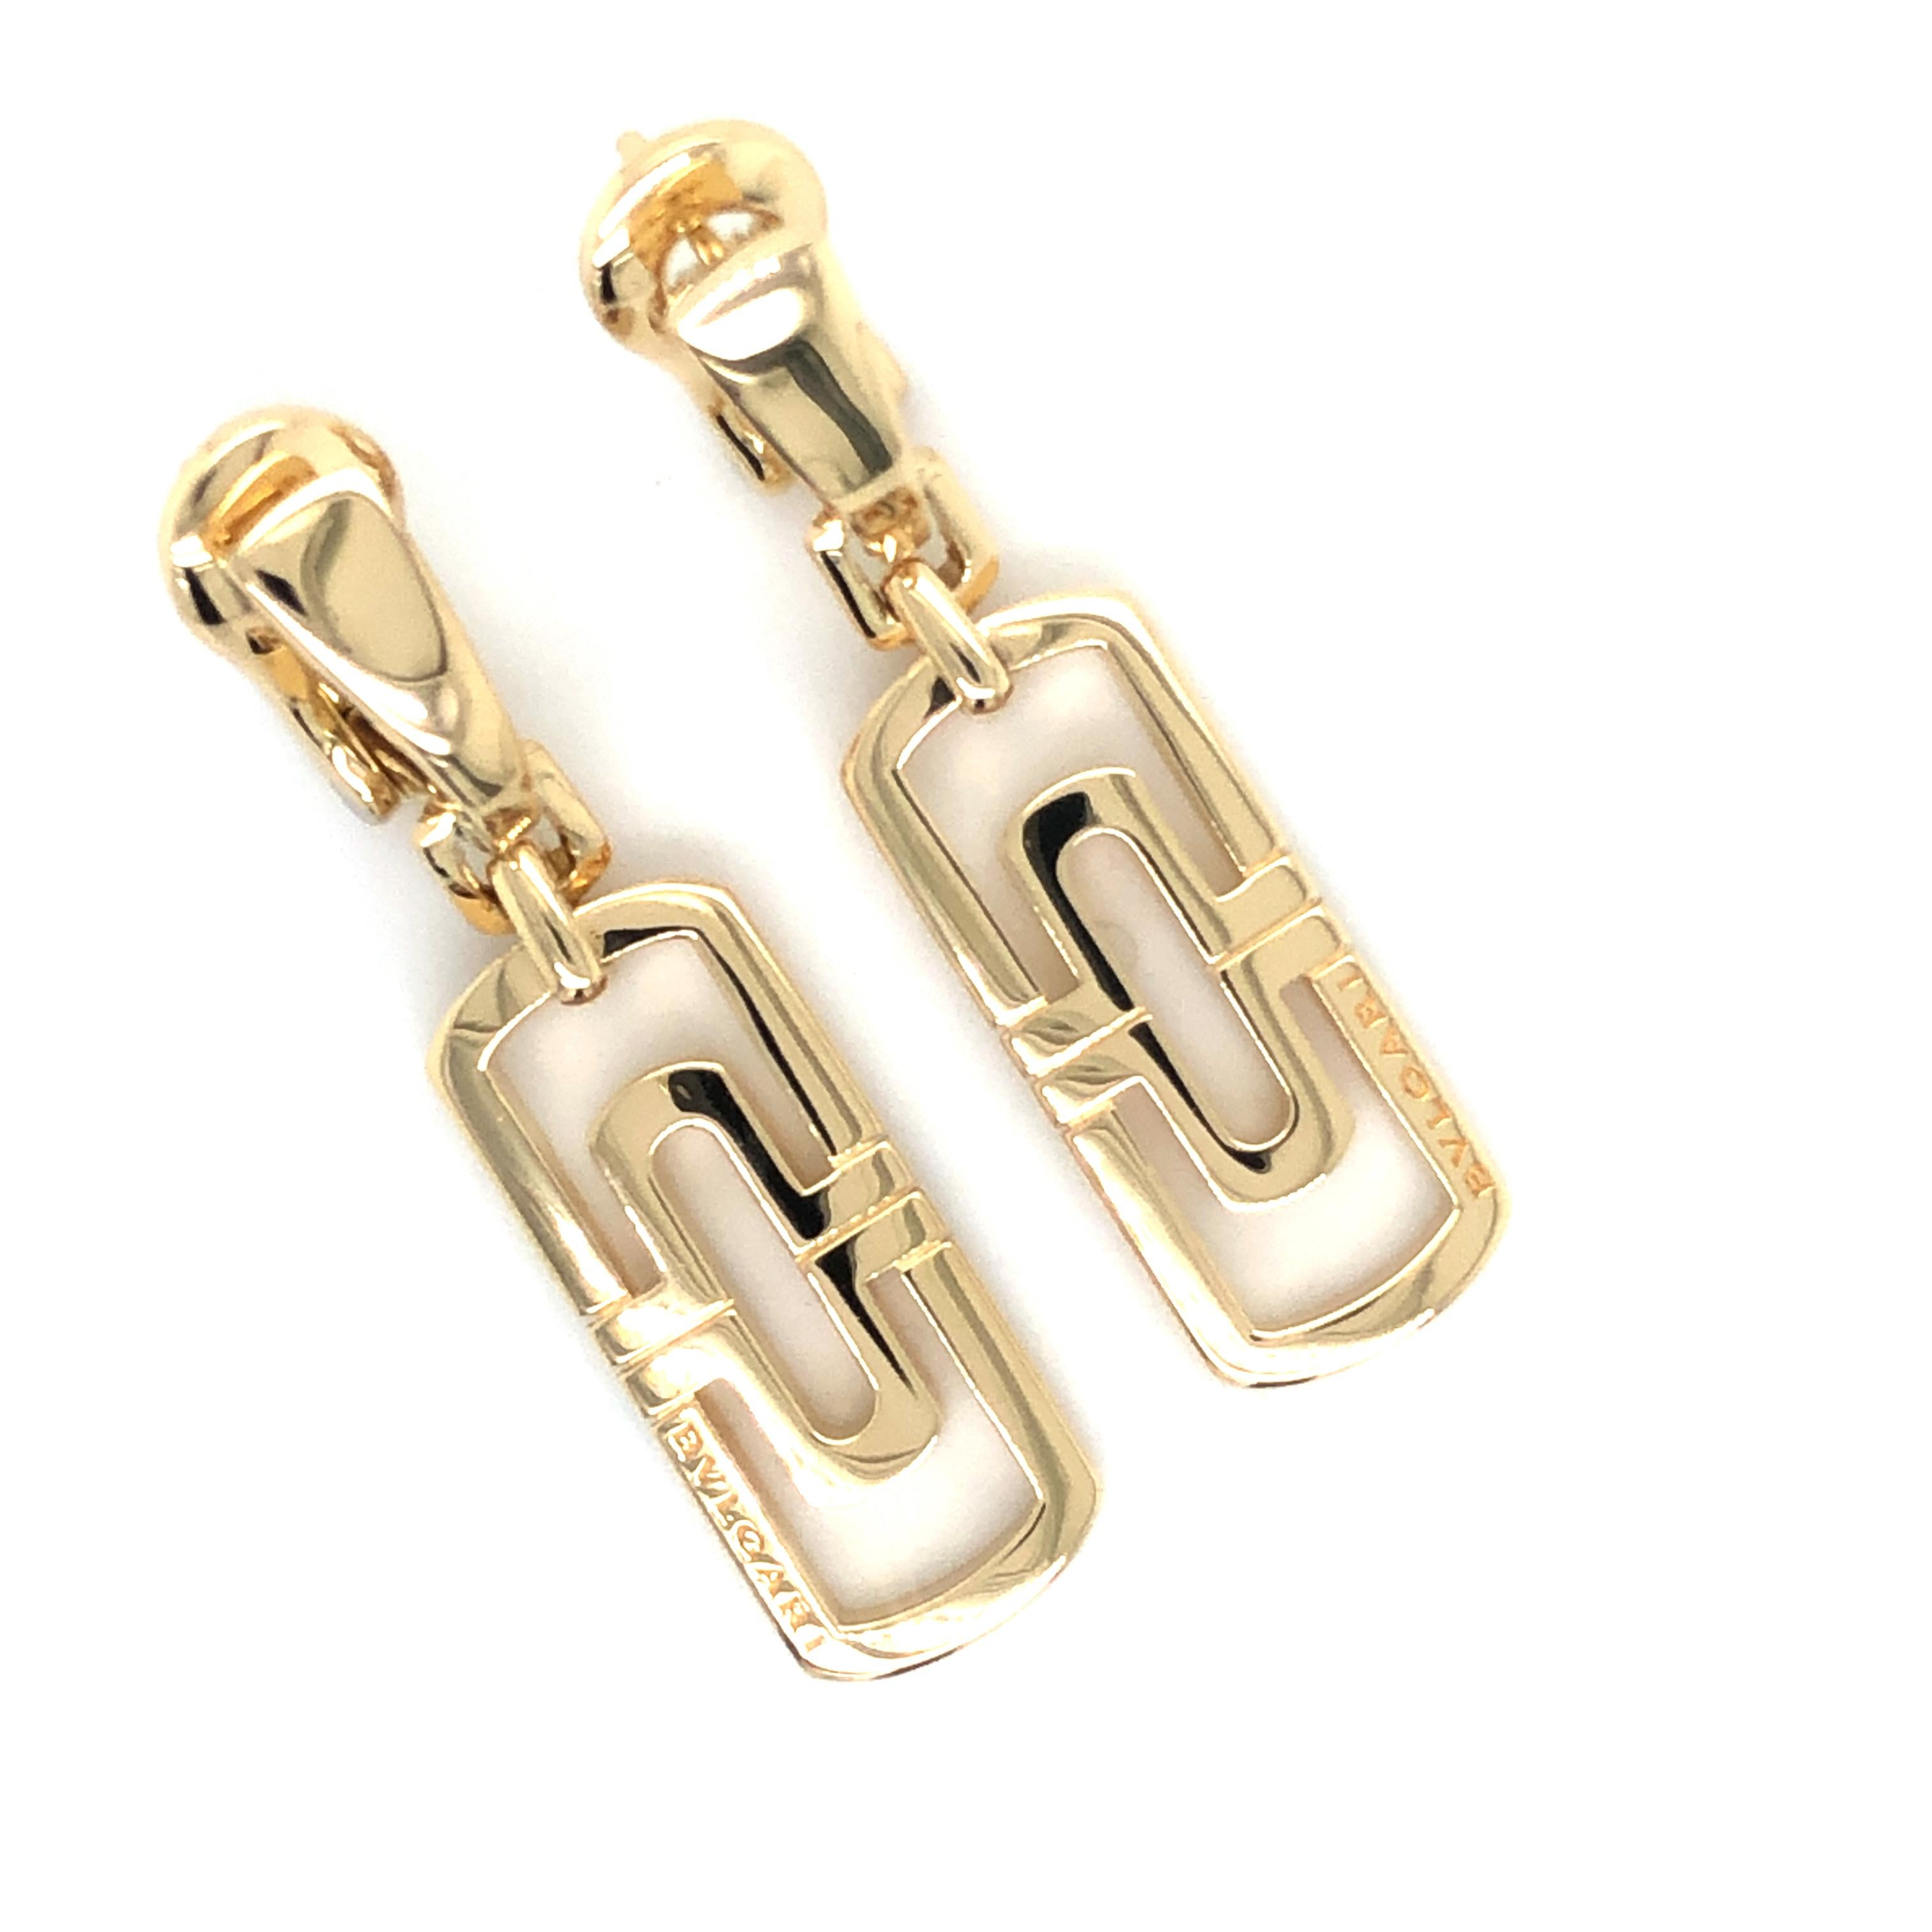 Bvlgari Parentesi 18k Yellow Gold Square Dangling Earrings In Excellent Condition For Sale In MIAMI, FL